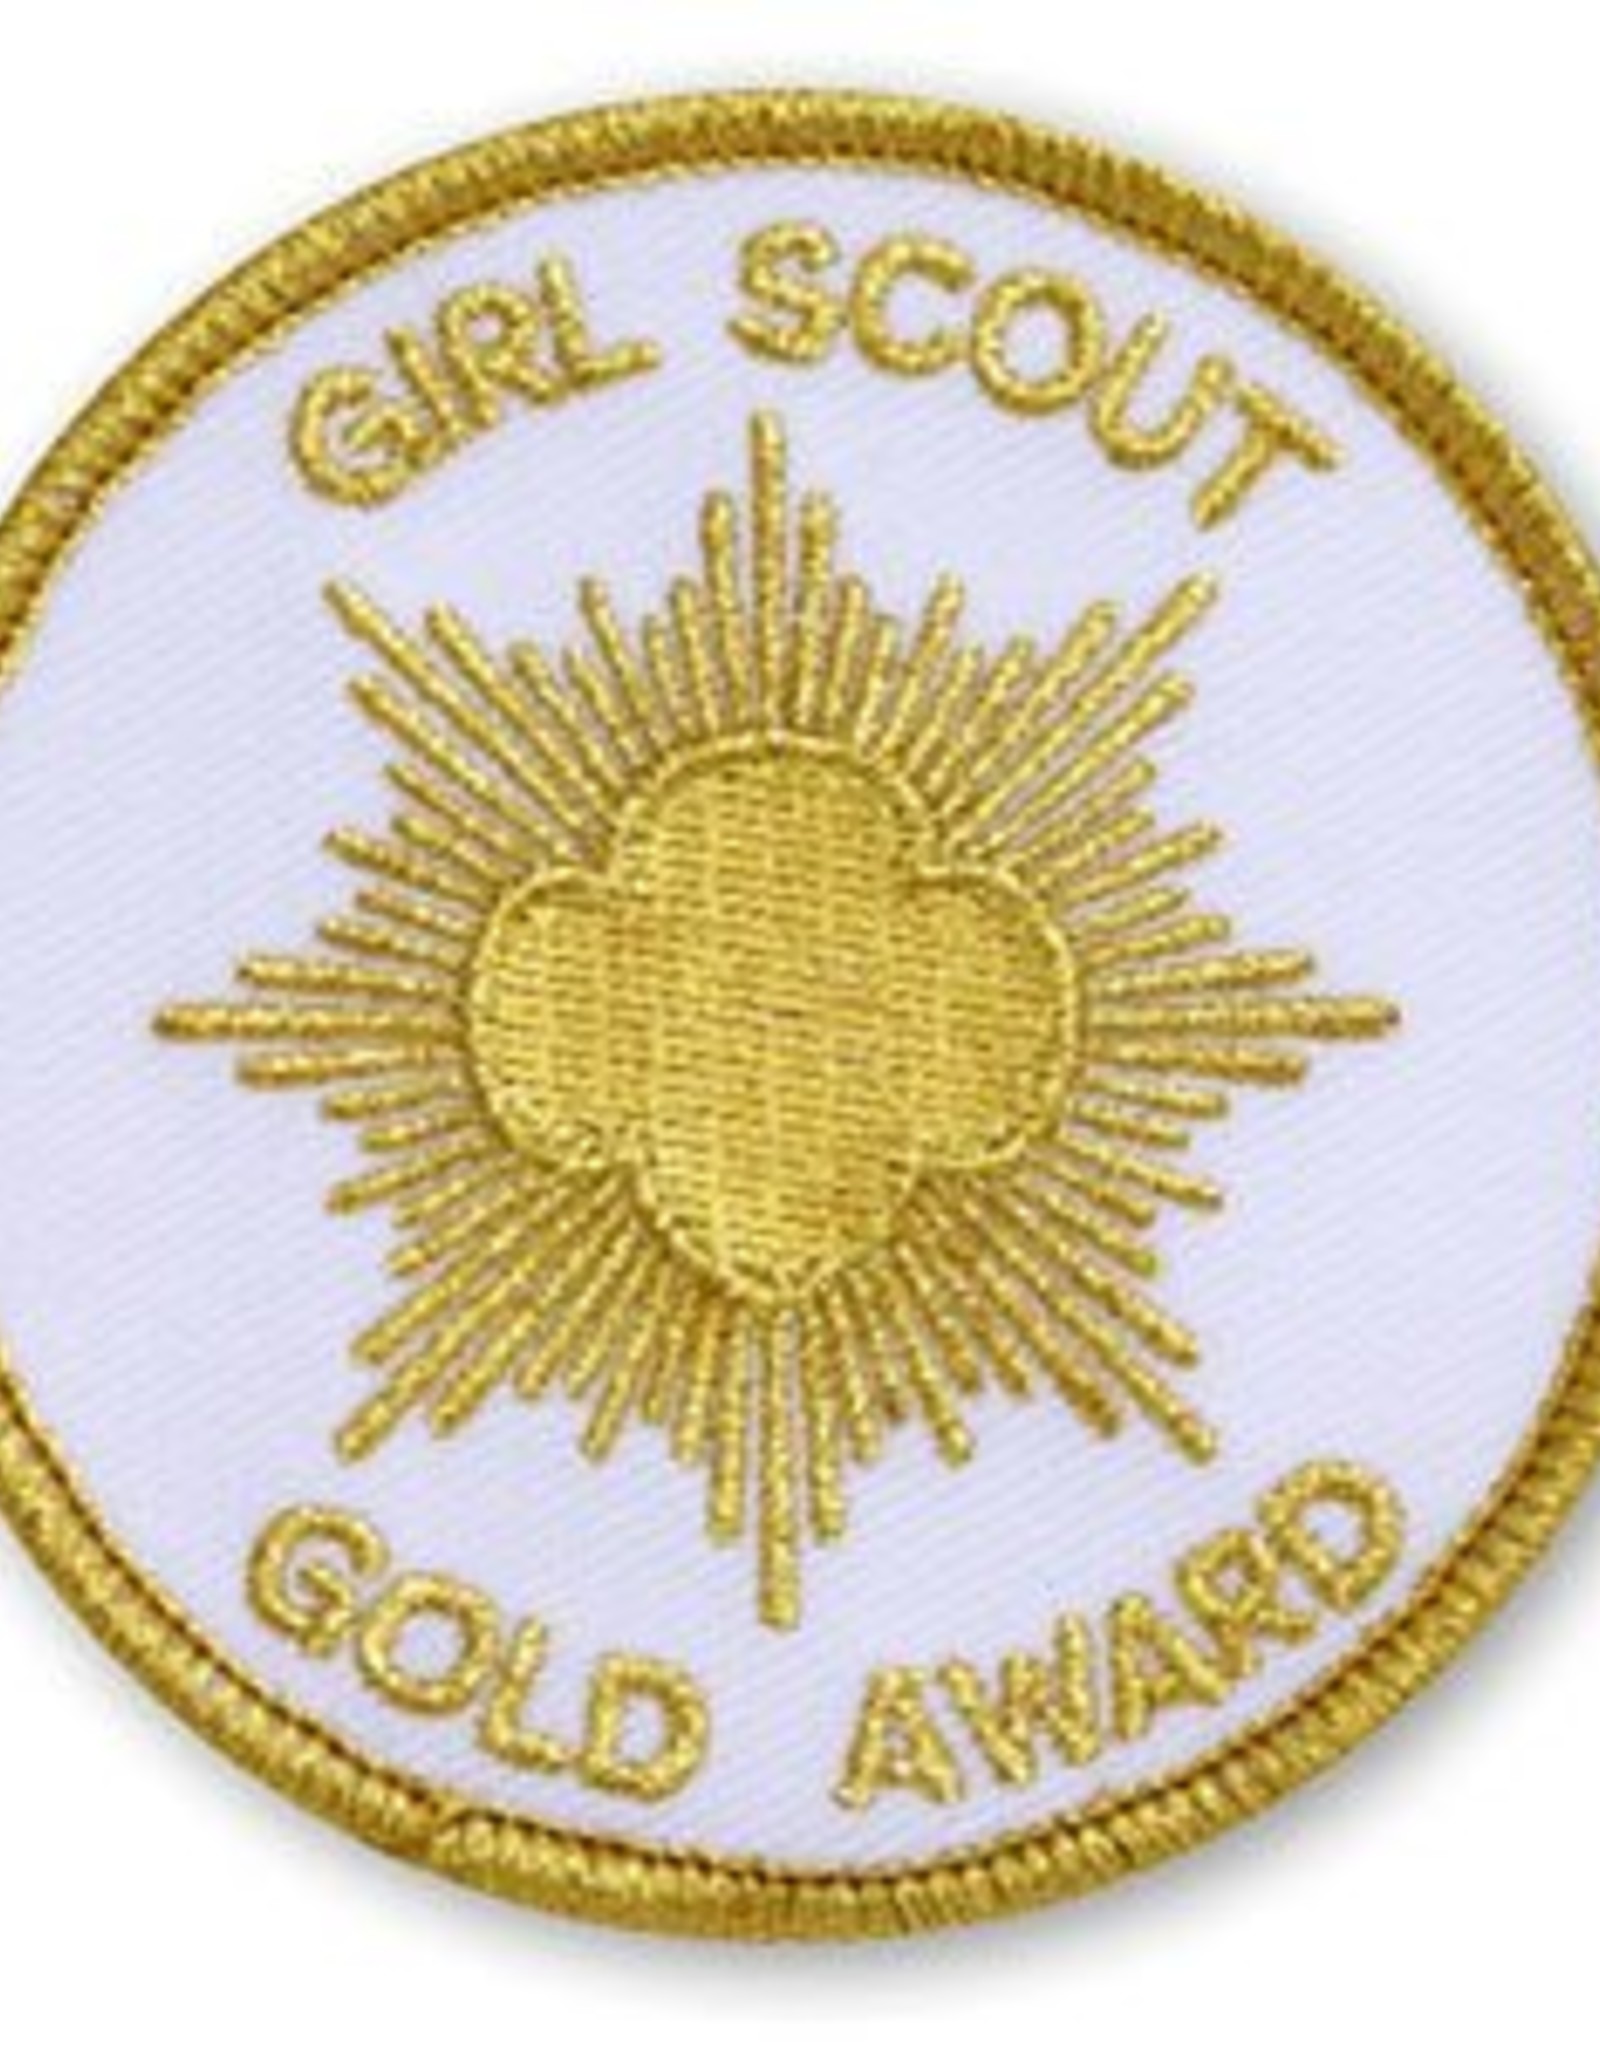 GIRL SCOUTS OF THE USA Gold Award Emblem Circle Patch